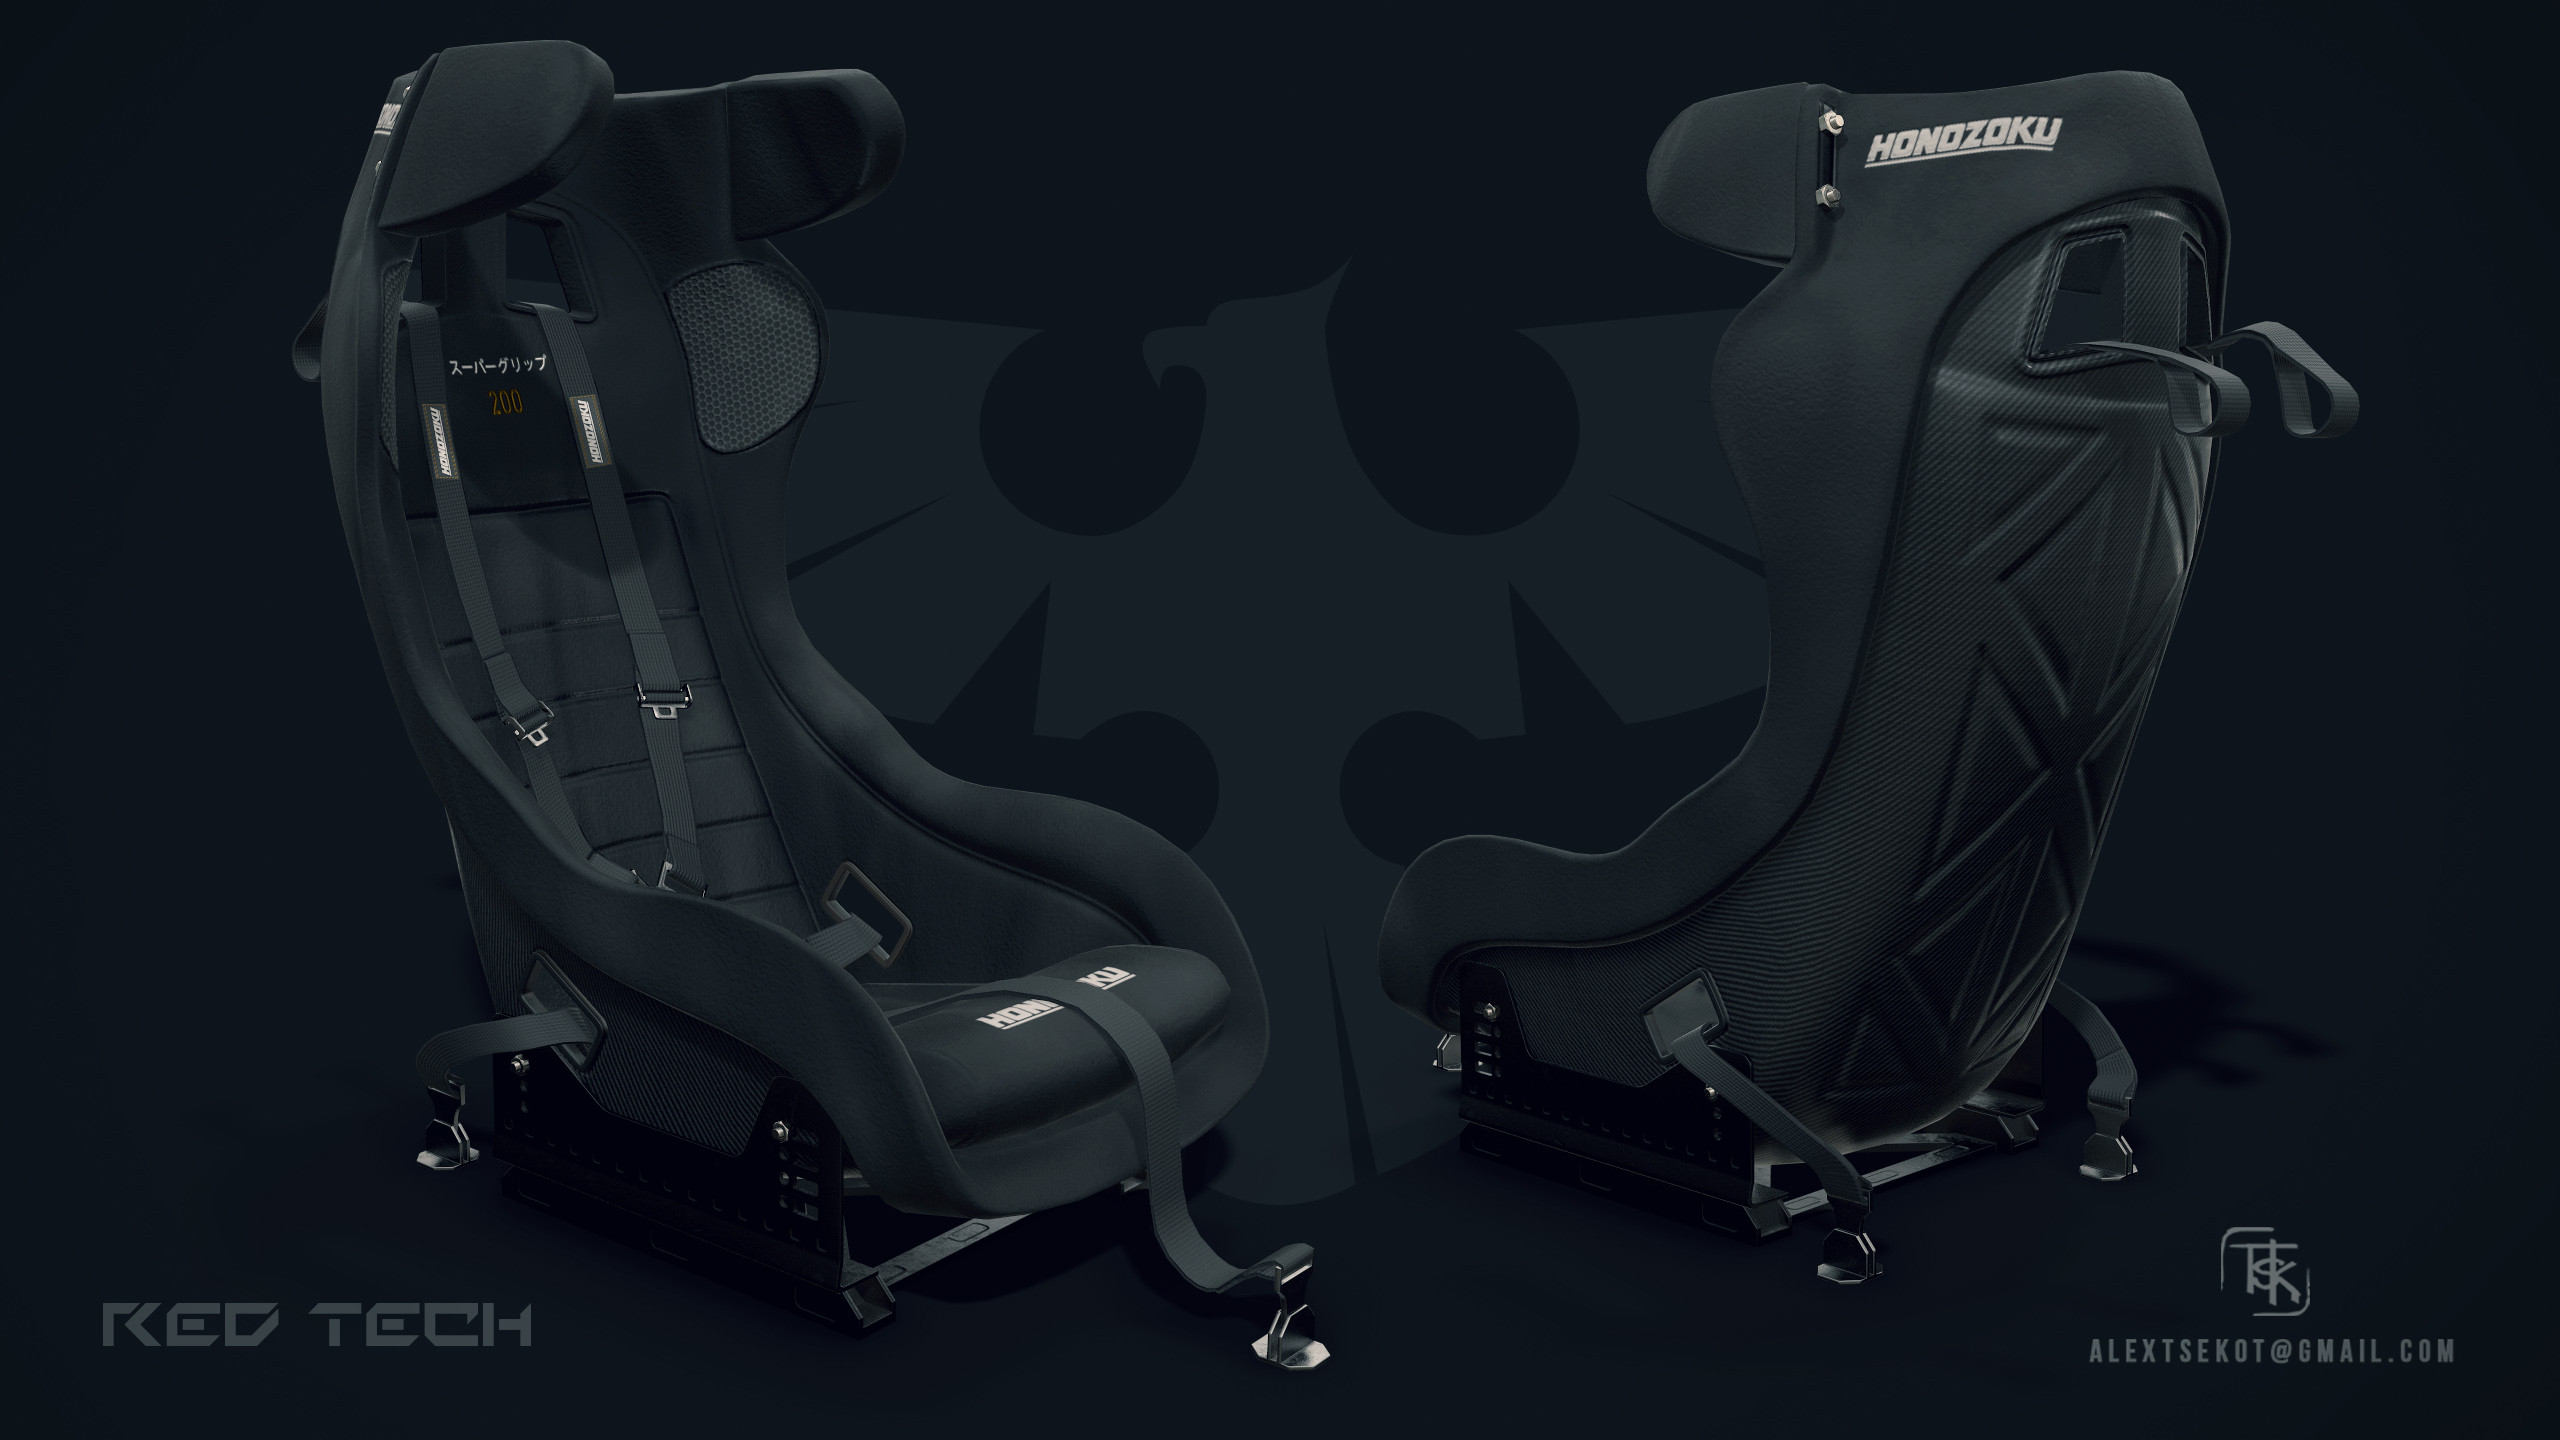 Racing seat - carbon reinforced with removable halo guards.